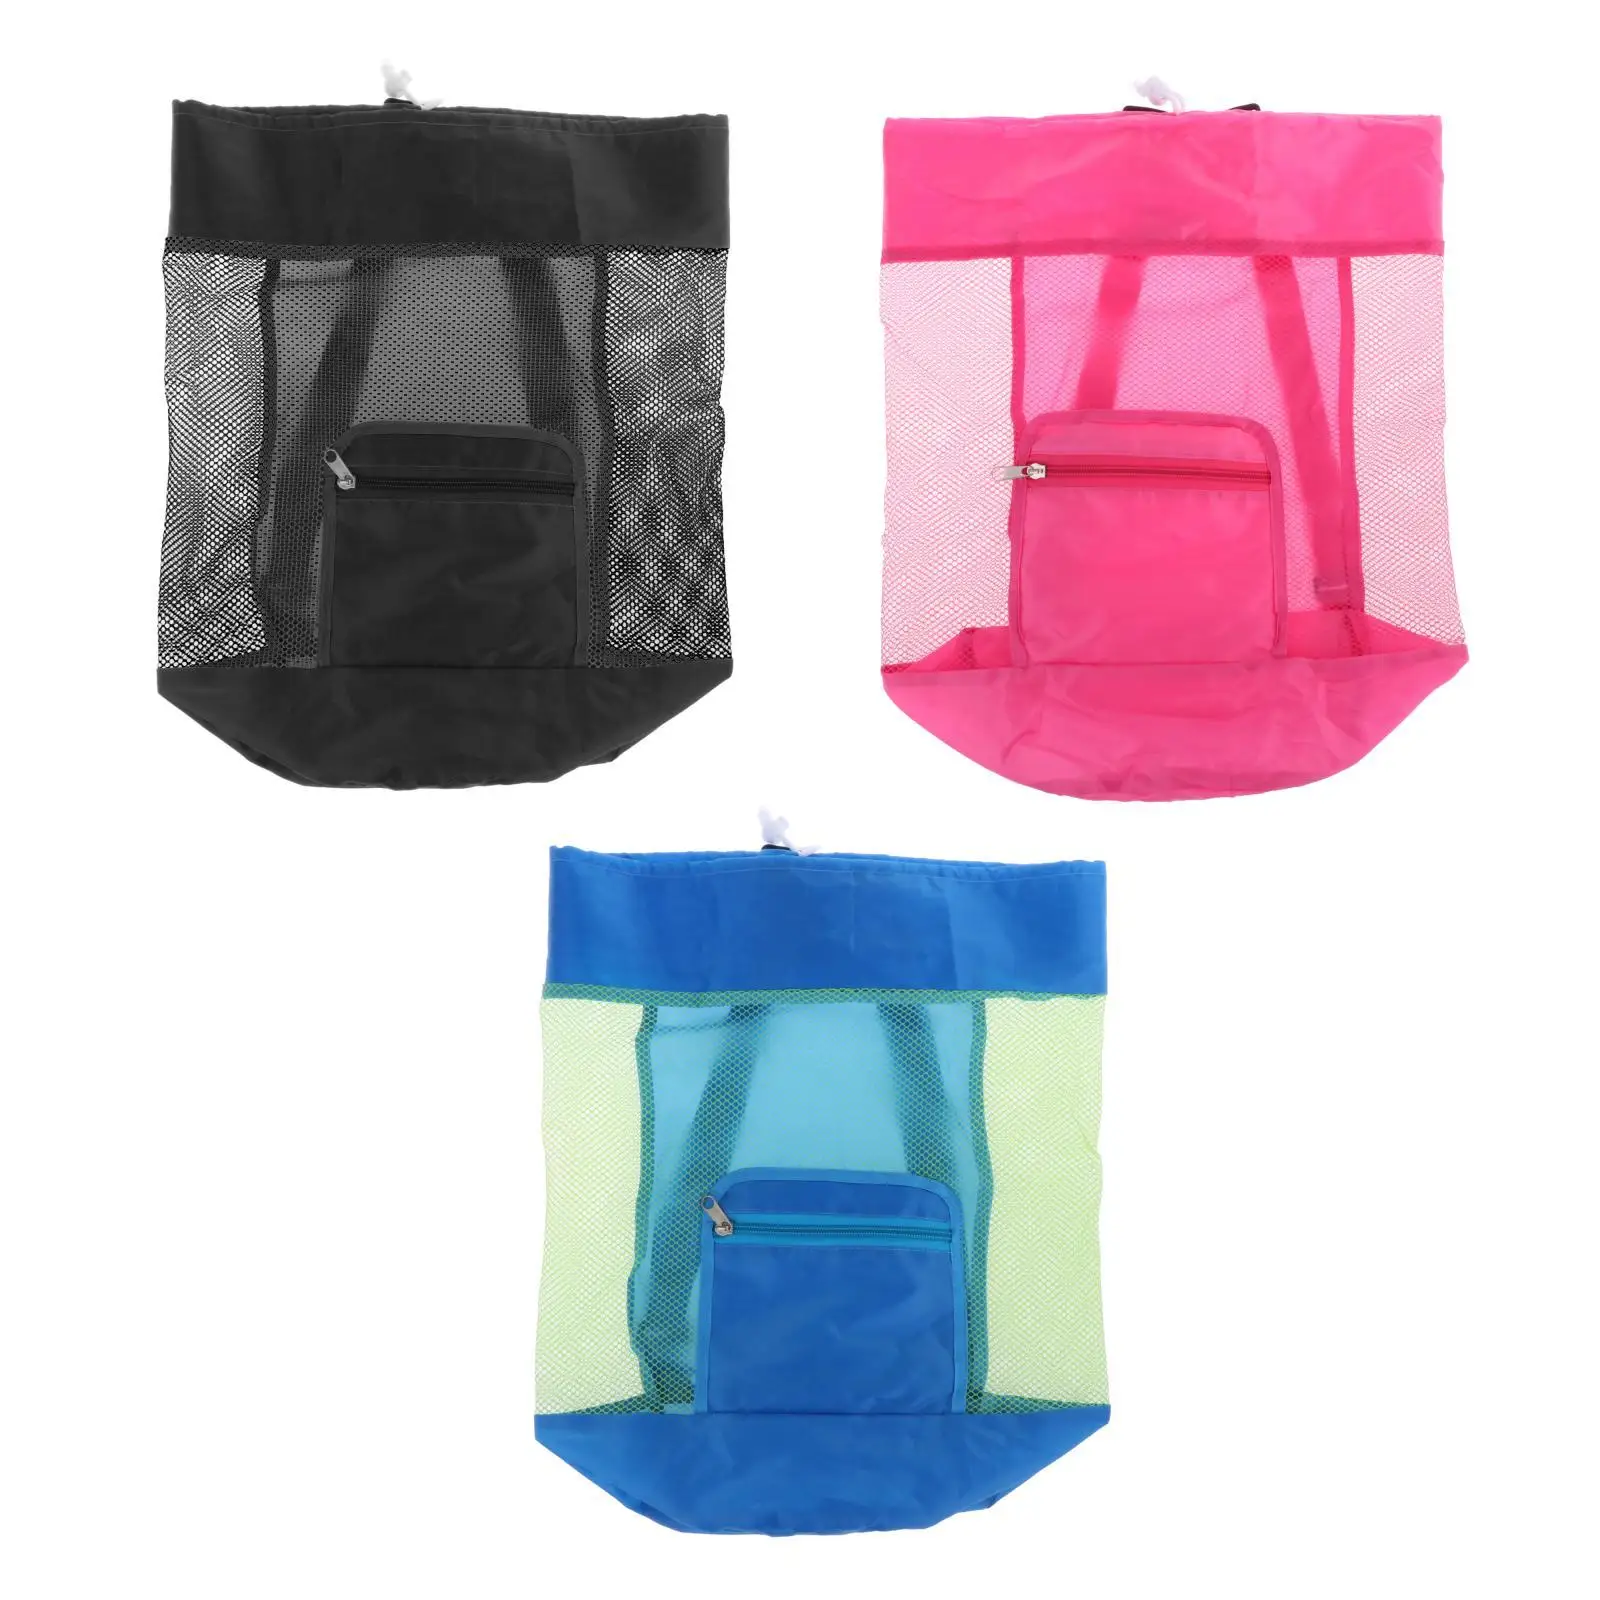 Kids Beach Bag Adjustable Straps Folding Travel Toy Organizer Quick Dry Kids Girls Beach Toy Bag for Travel Vacation Fittings